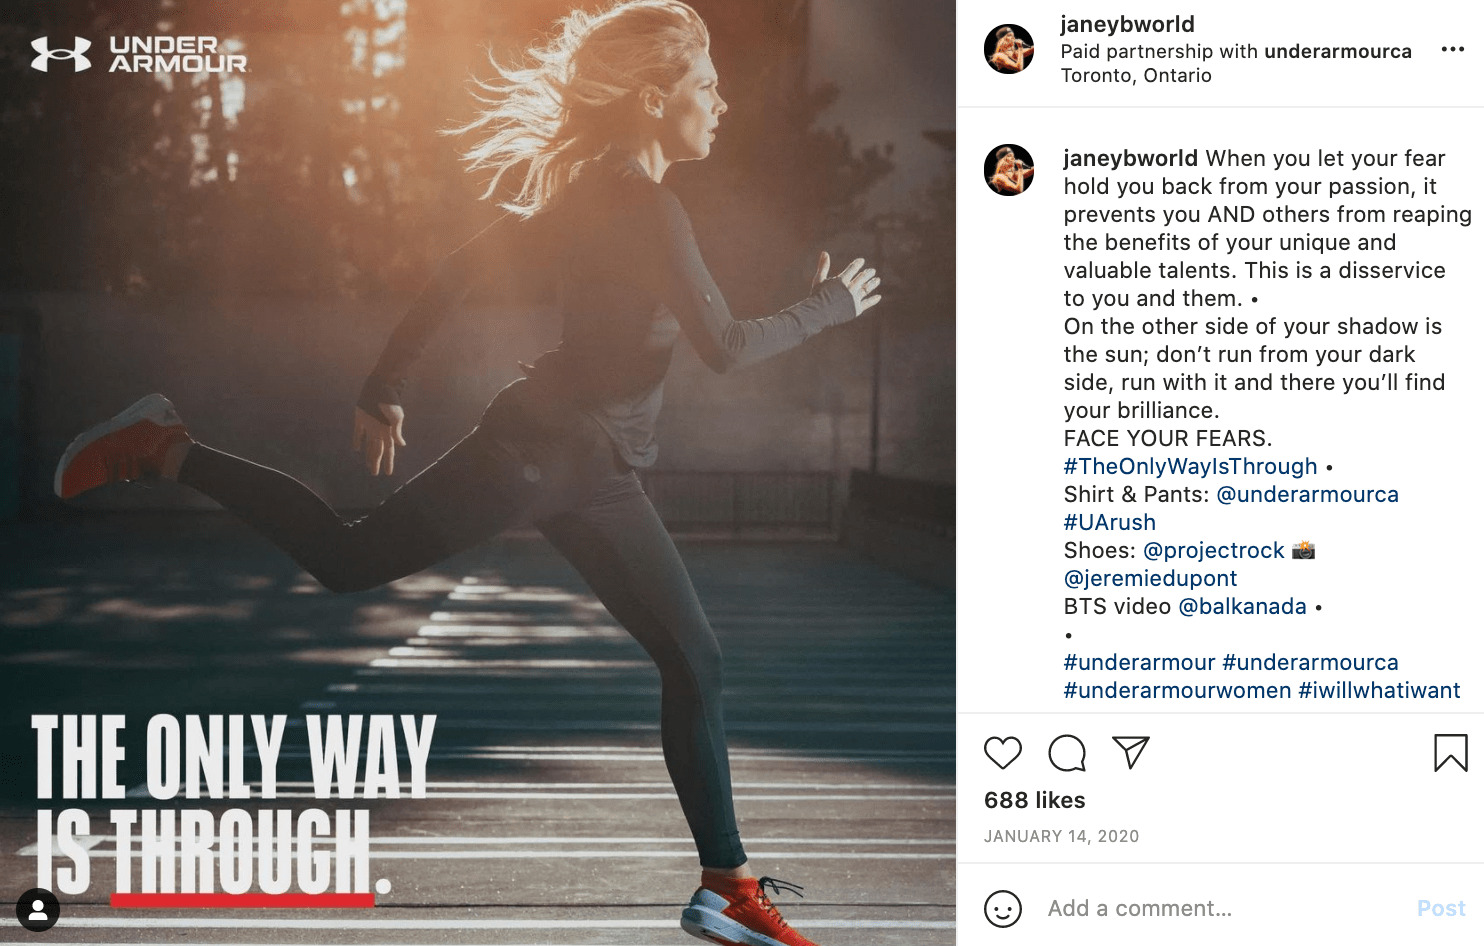 under armour's instagram campaign, an example of internet marketing